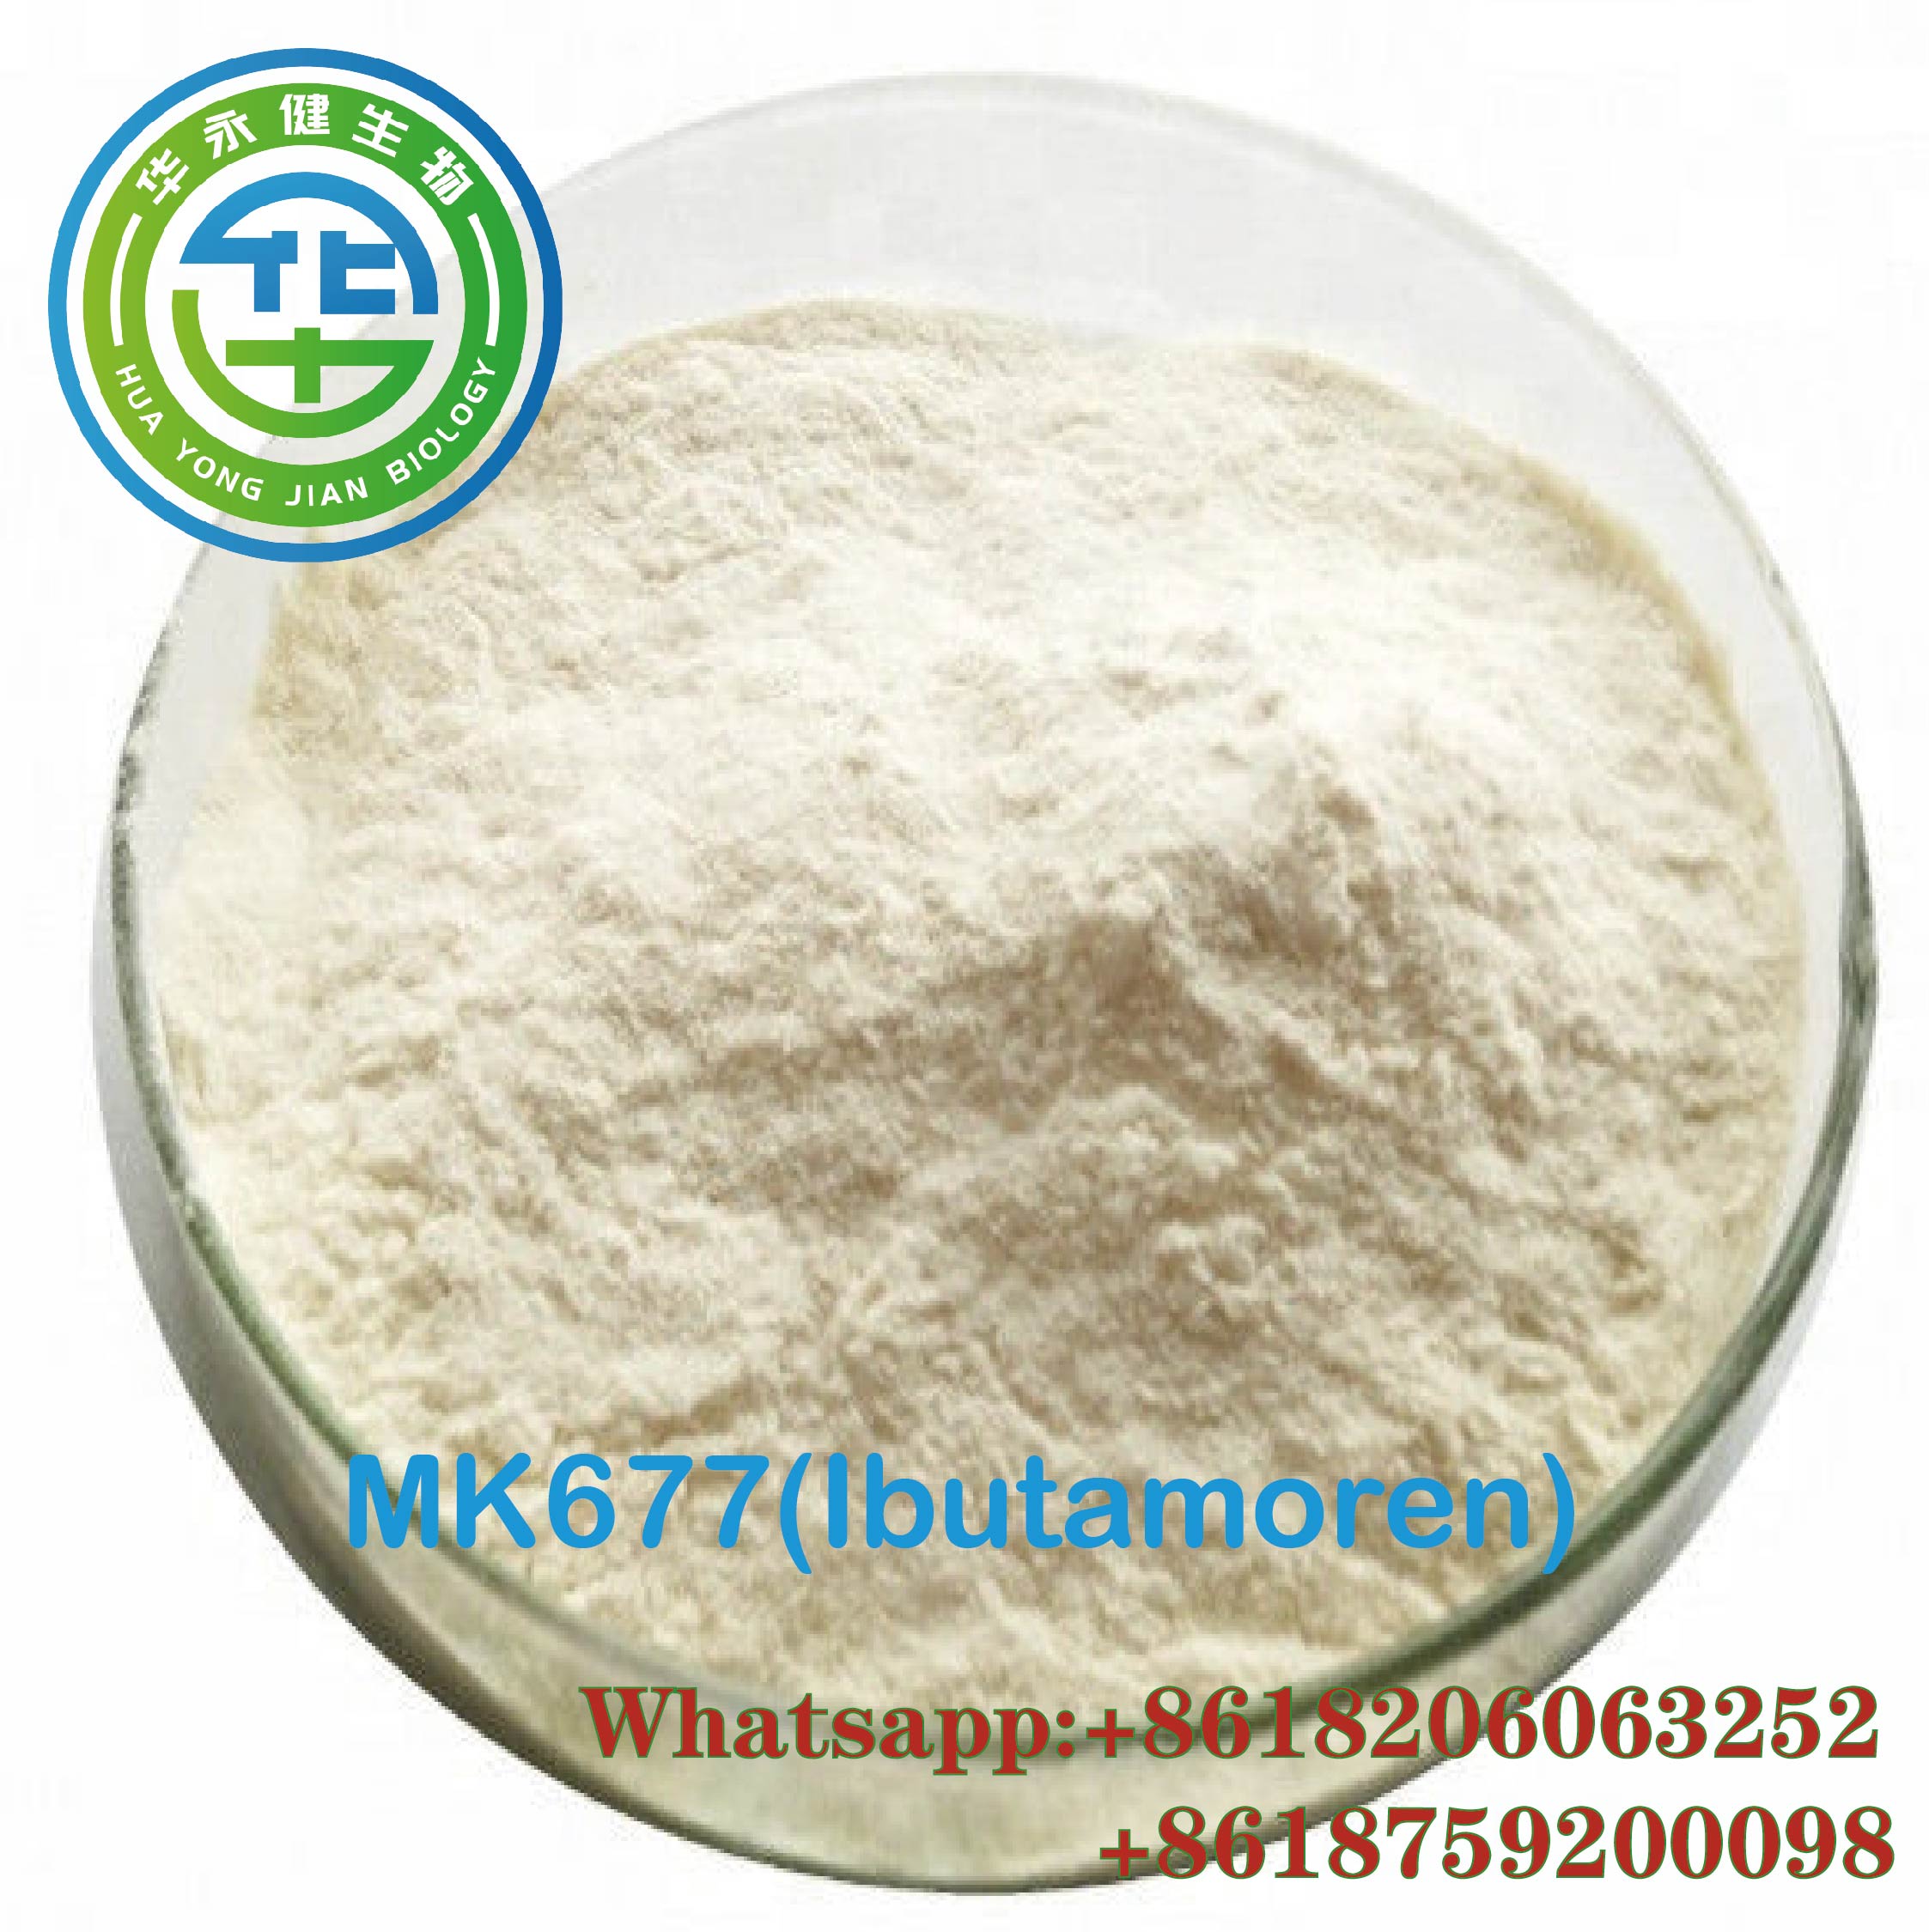 High Purity Effective MK-677 / Ibutamoren SARMS Raw Powder for muscle gain and fat loss 